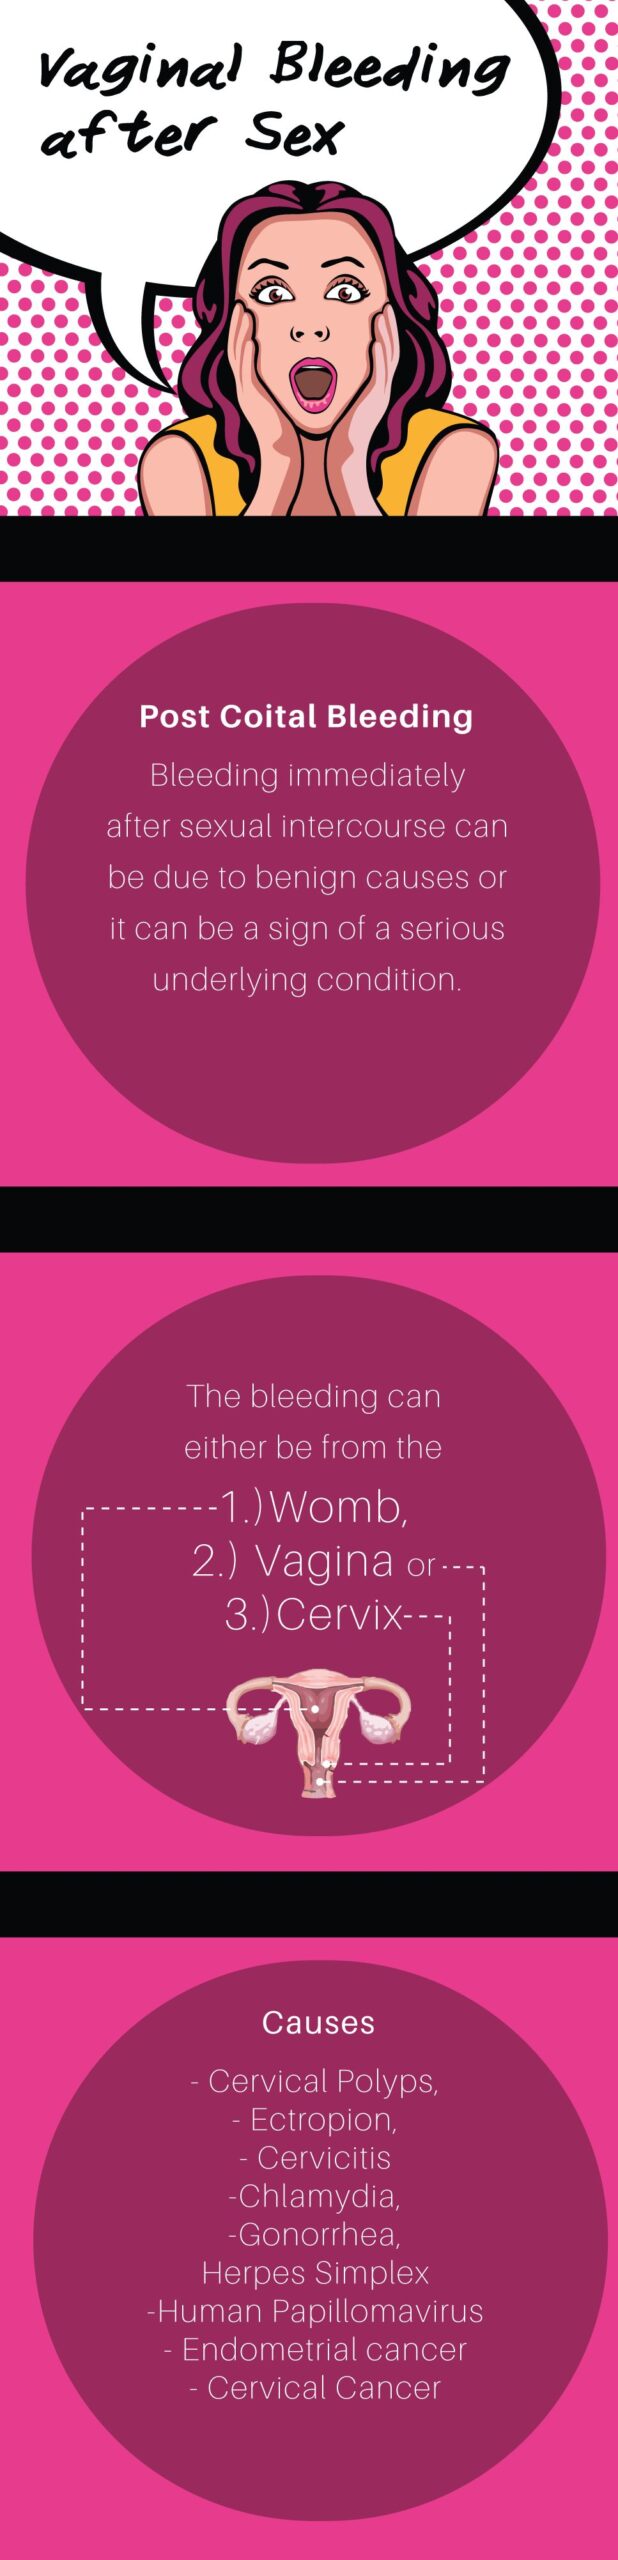 The Causes Of Vaginal Bleeding After Sex Post Coital Bleeding 7444